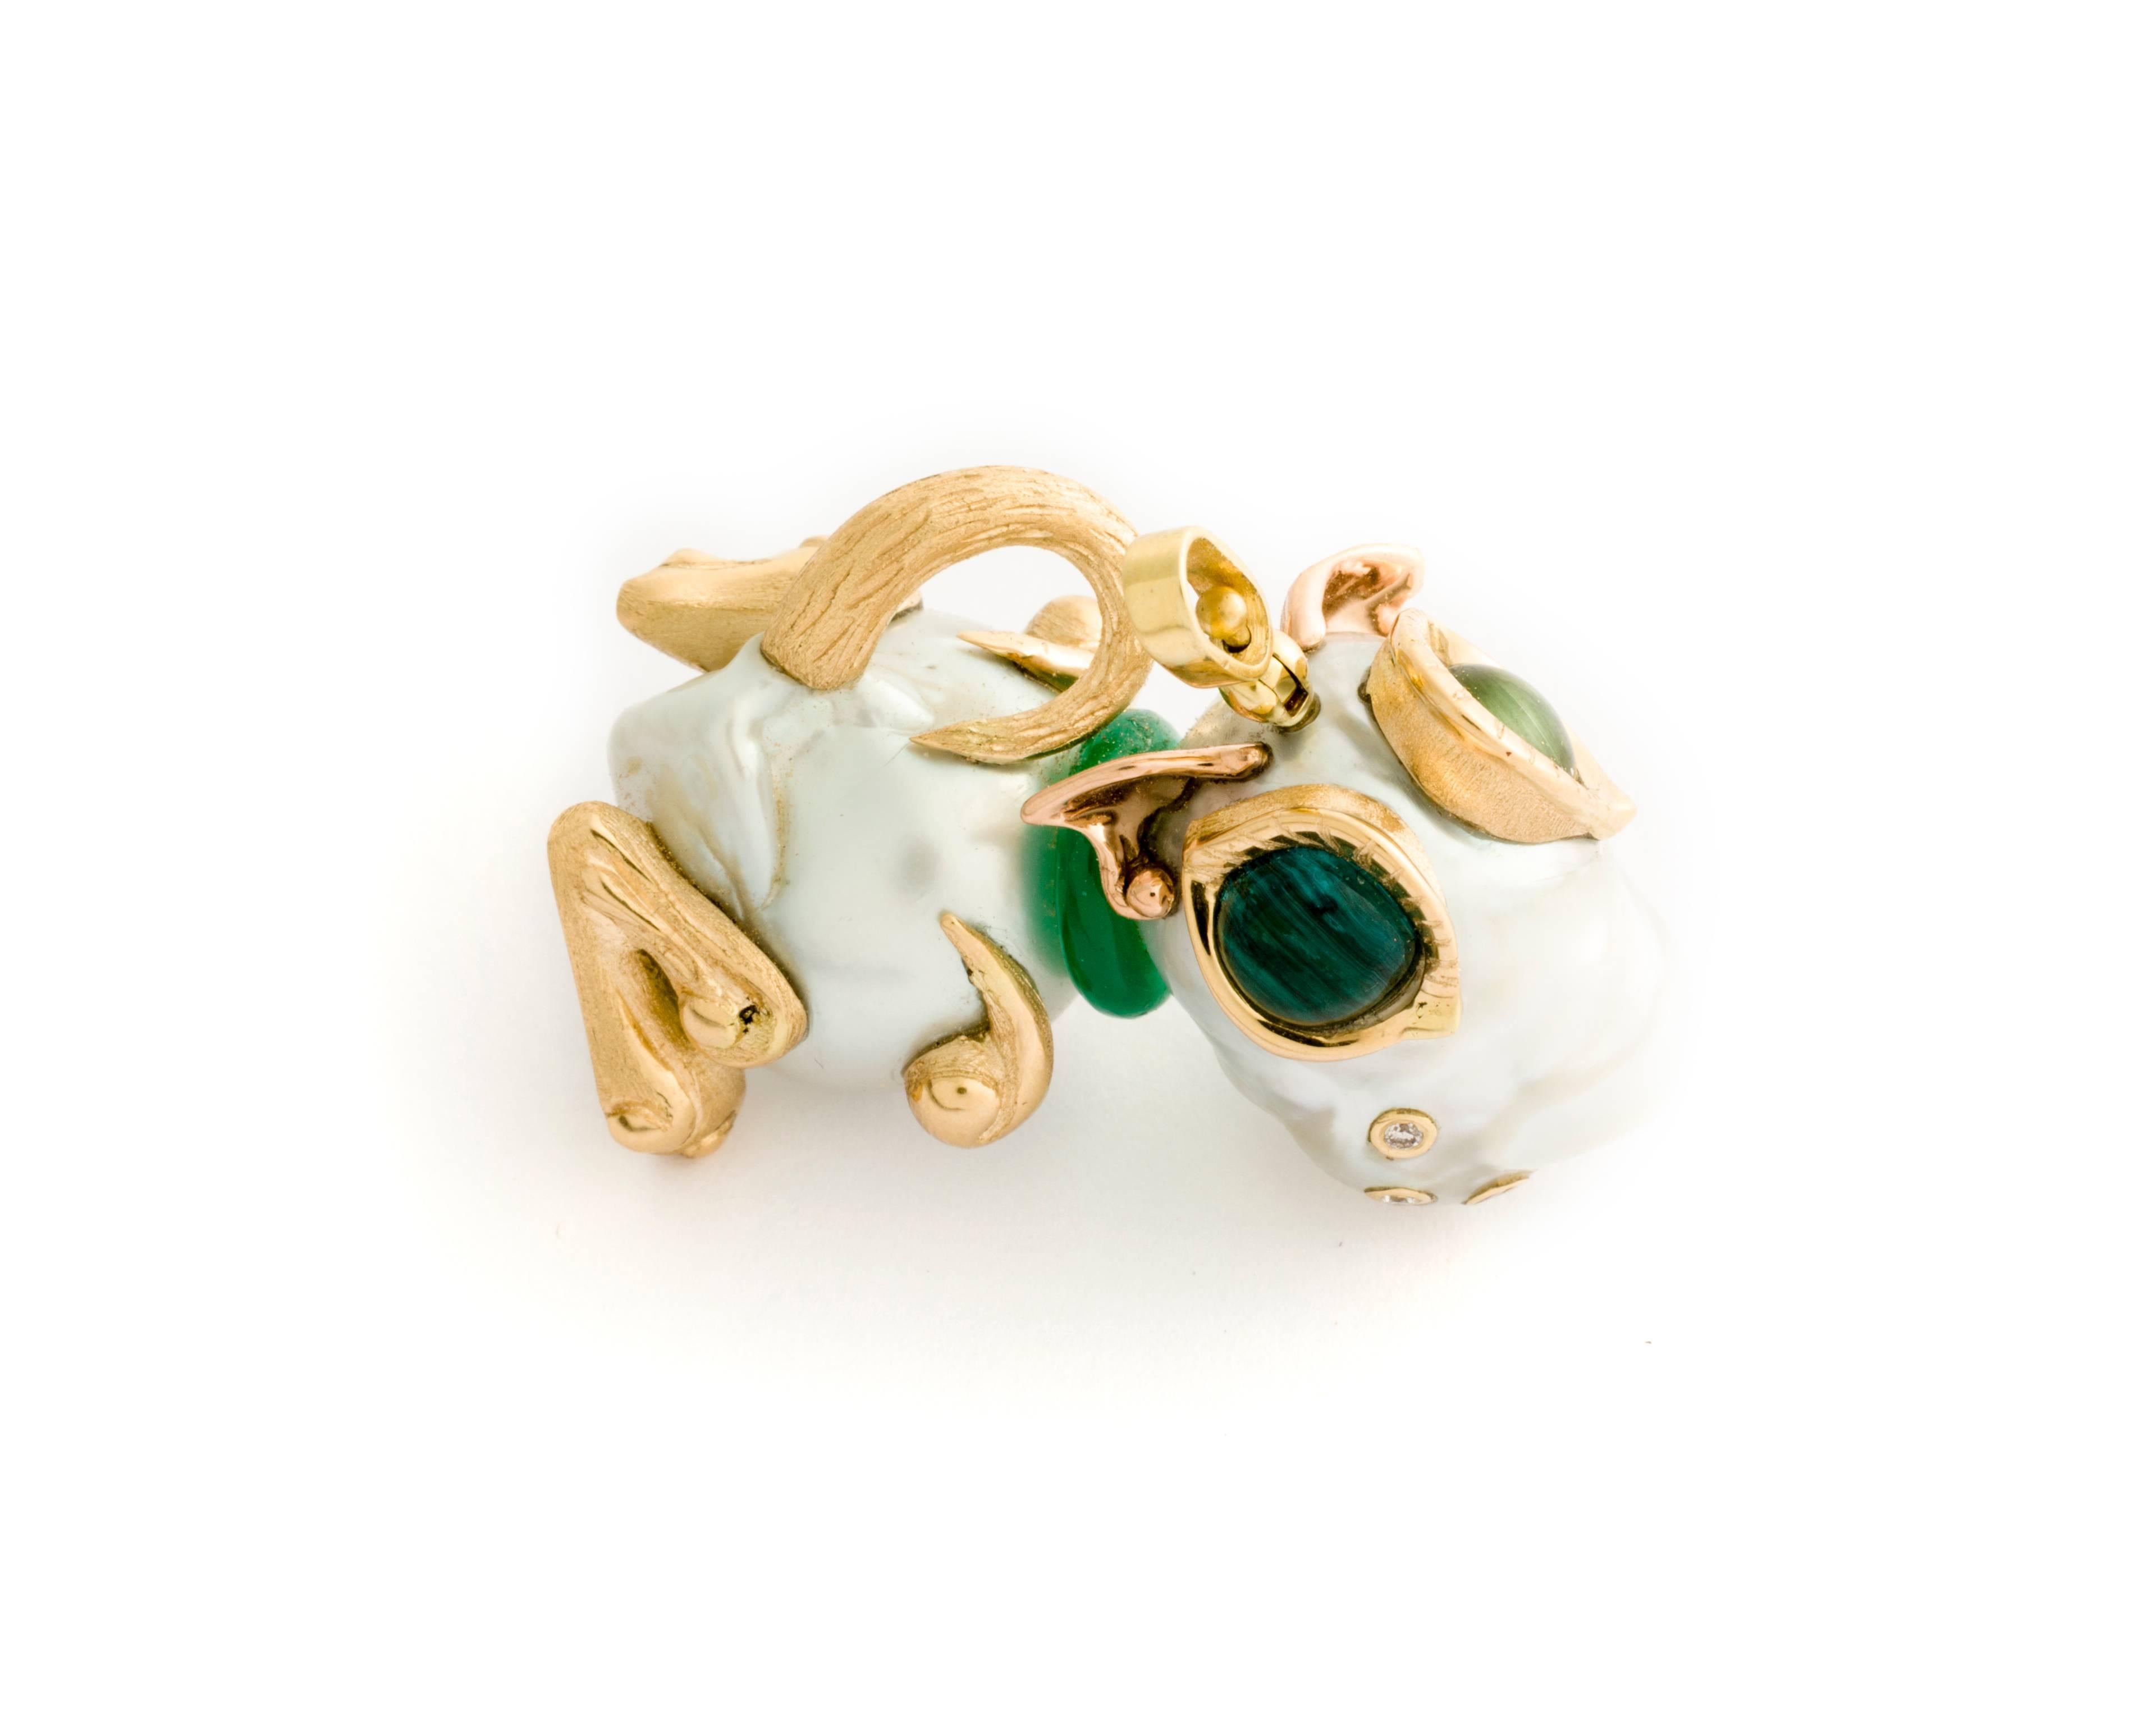 This darling little puppy pendant has two Baroque South Sea Pearls (the first 19.46 x 16.62mm and the second 17.91 x 15.60m) set in 18k yellow and pink gold with rutilated green and blue tourmaline, green jade collar ring, and .18 carats of white